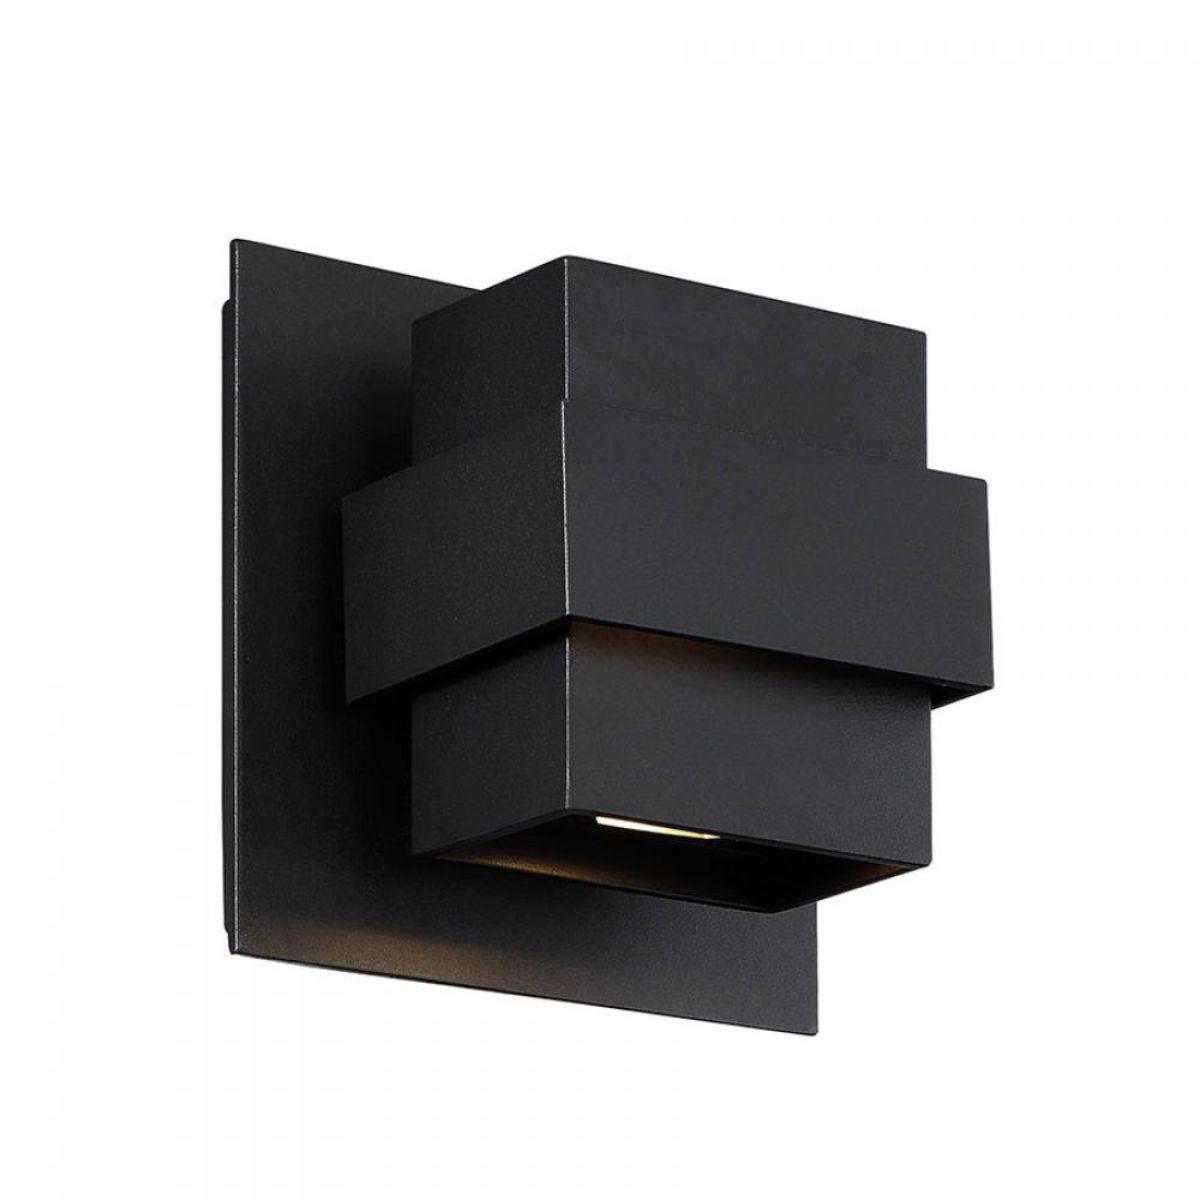 Pandora 7 In. LED Outdoor Wall Sconce